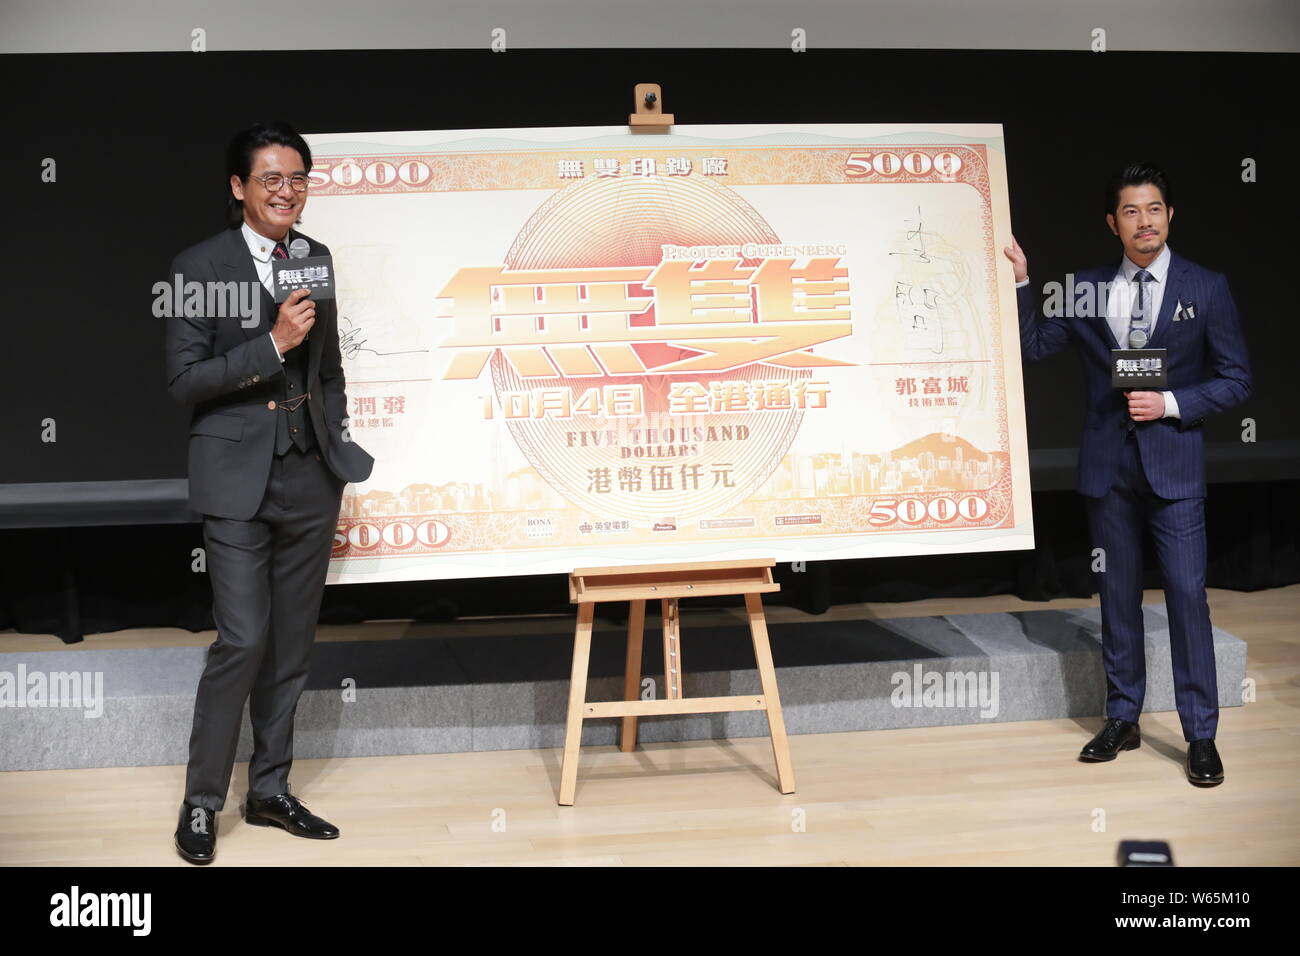 Hong Kong actor Chow Yun-fat, previously known as Donald Chow, left, and singer and actor Aaron Kwok Fu-shing attend a press conference for new movie Stock Photo